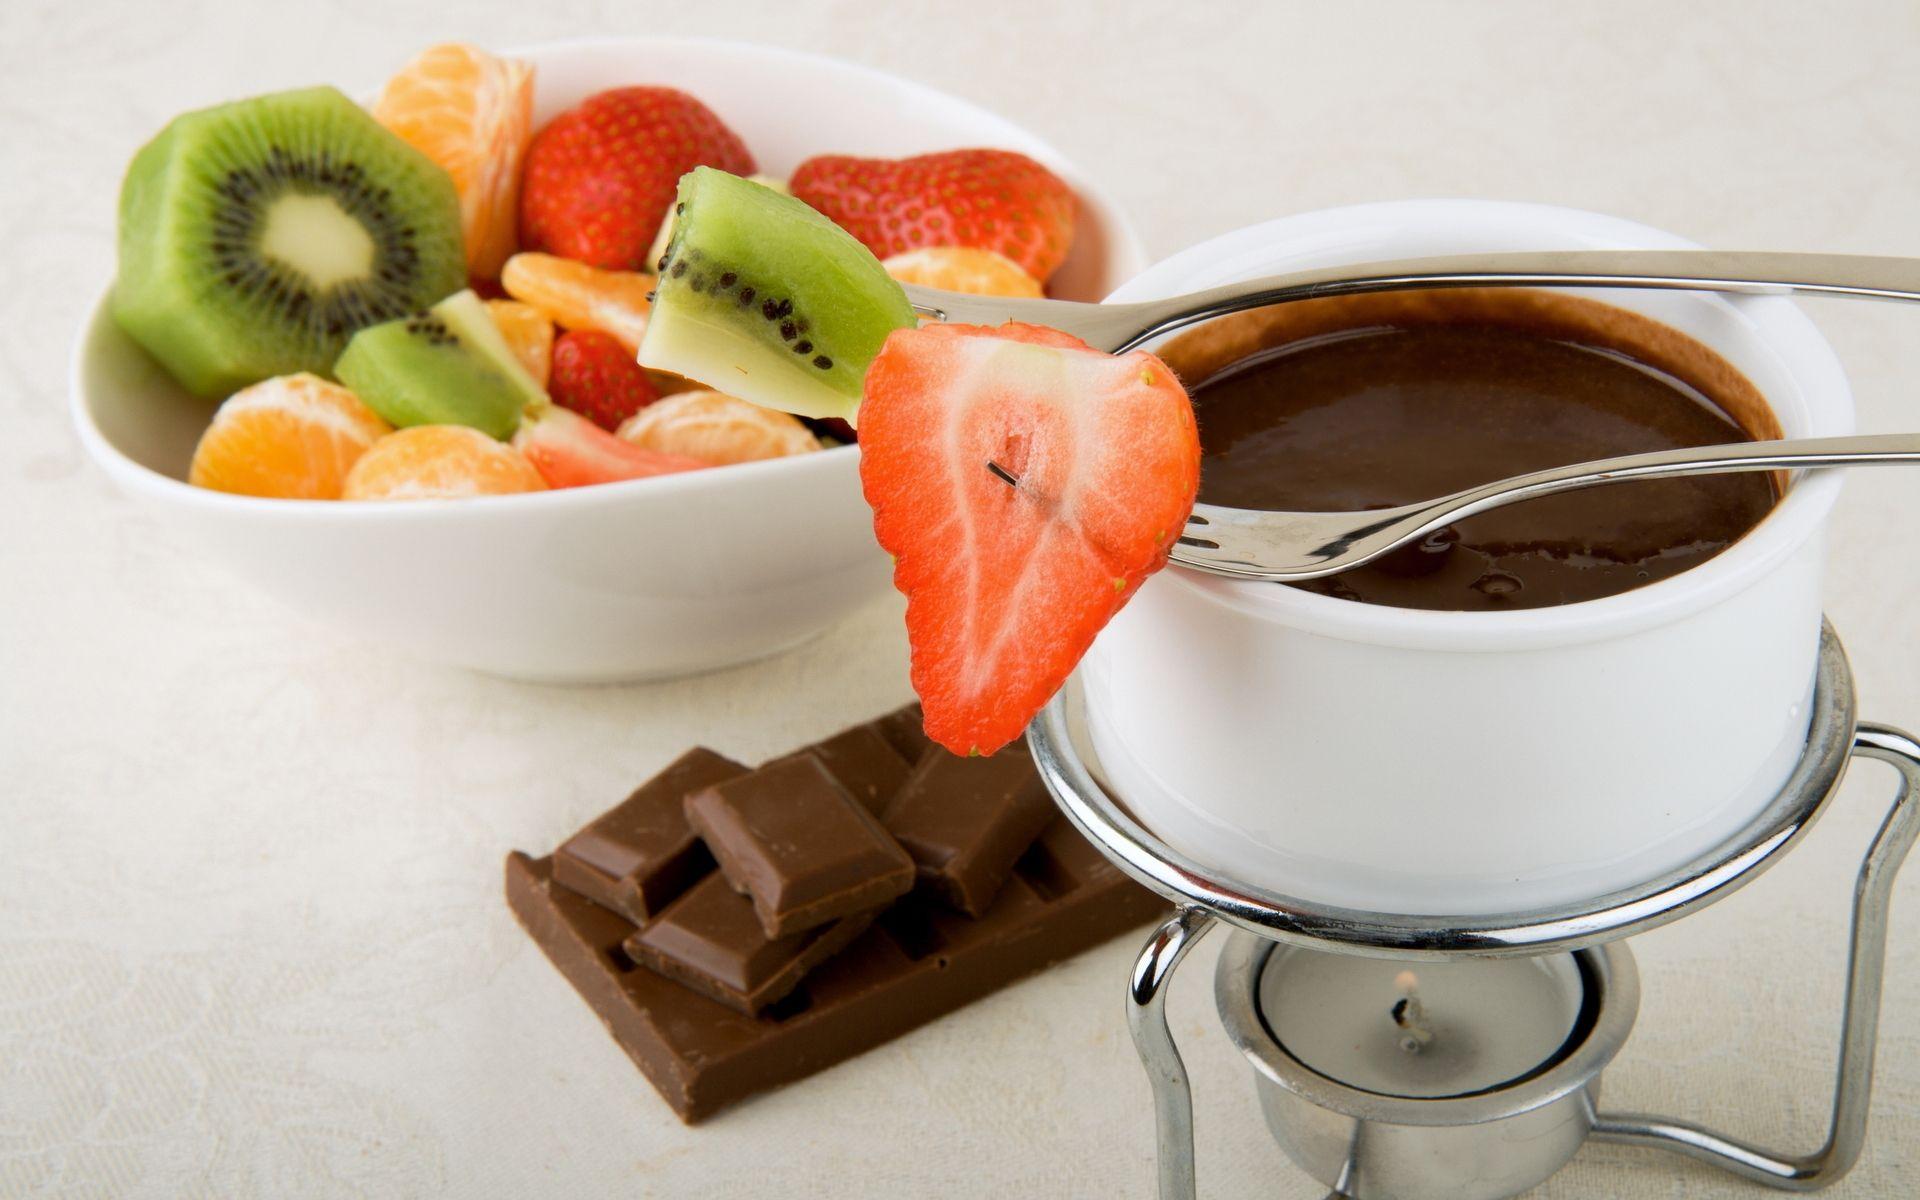 Hot chocolate with fruit wallpaper and image